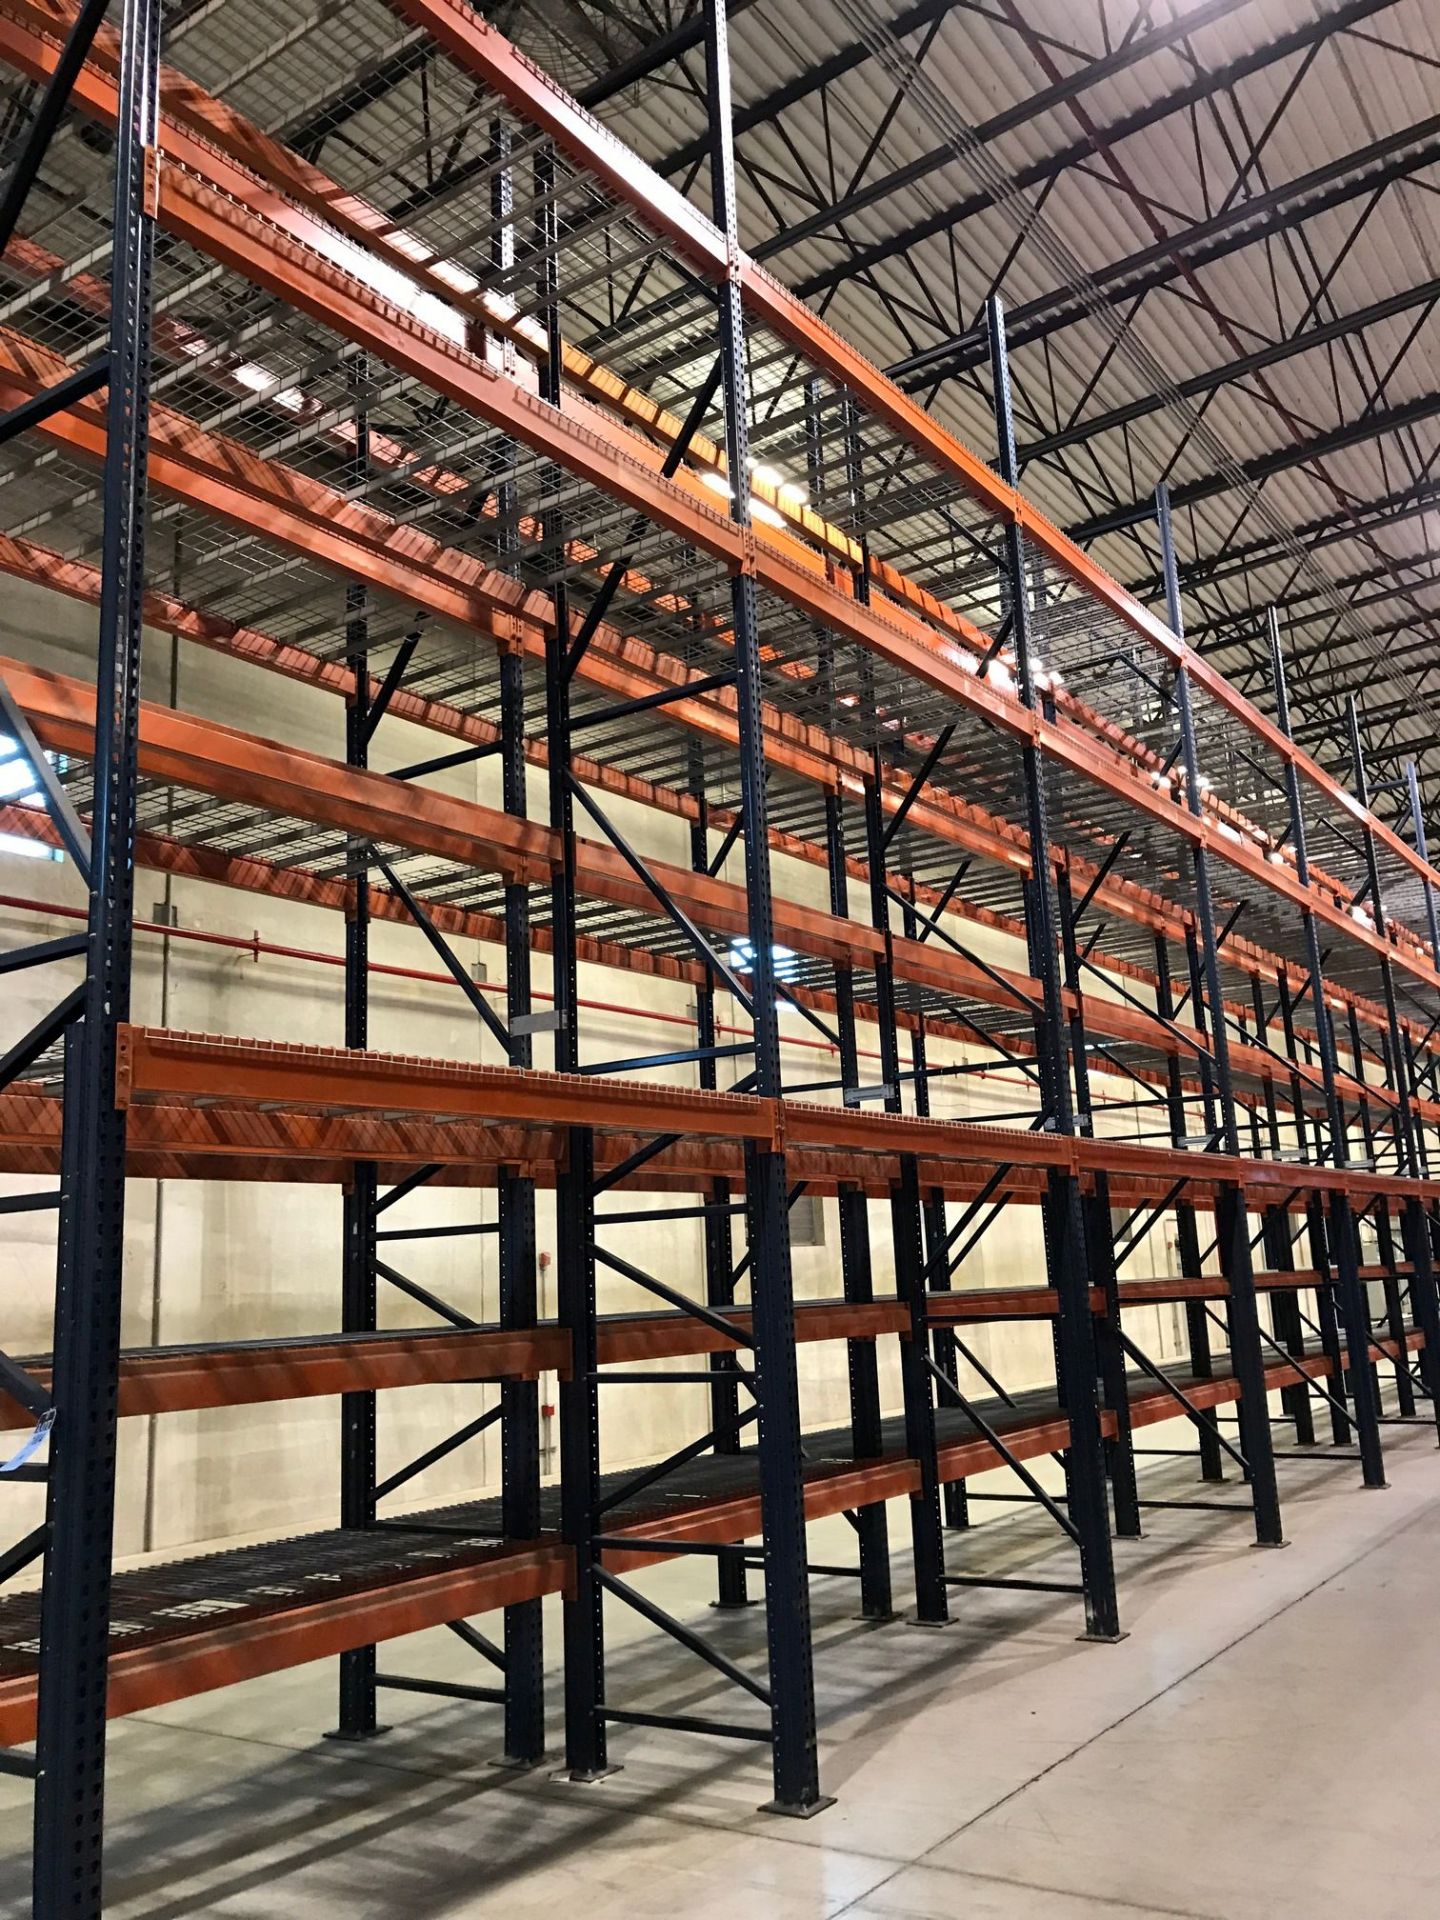 SECTIONS 60" X 108" X 288" TEARDROP TYPE ADJUSTABLE BEAM PALLET RACK WITH WIRE DECKING, 6" HIGH - Image 2 of 16